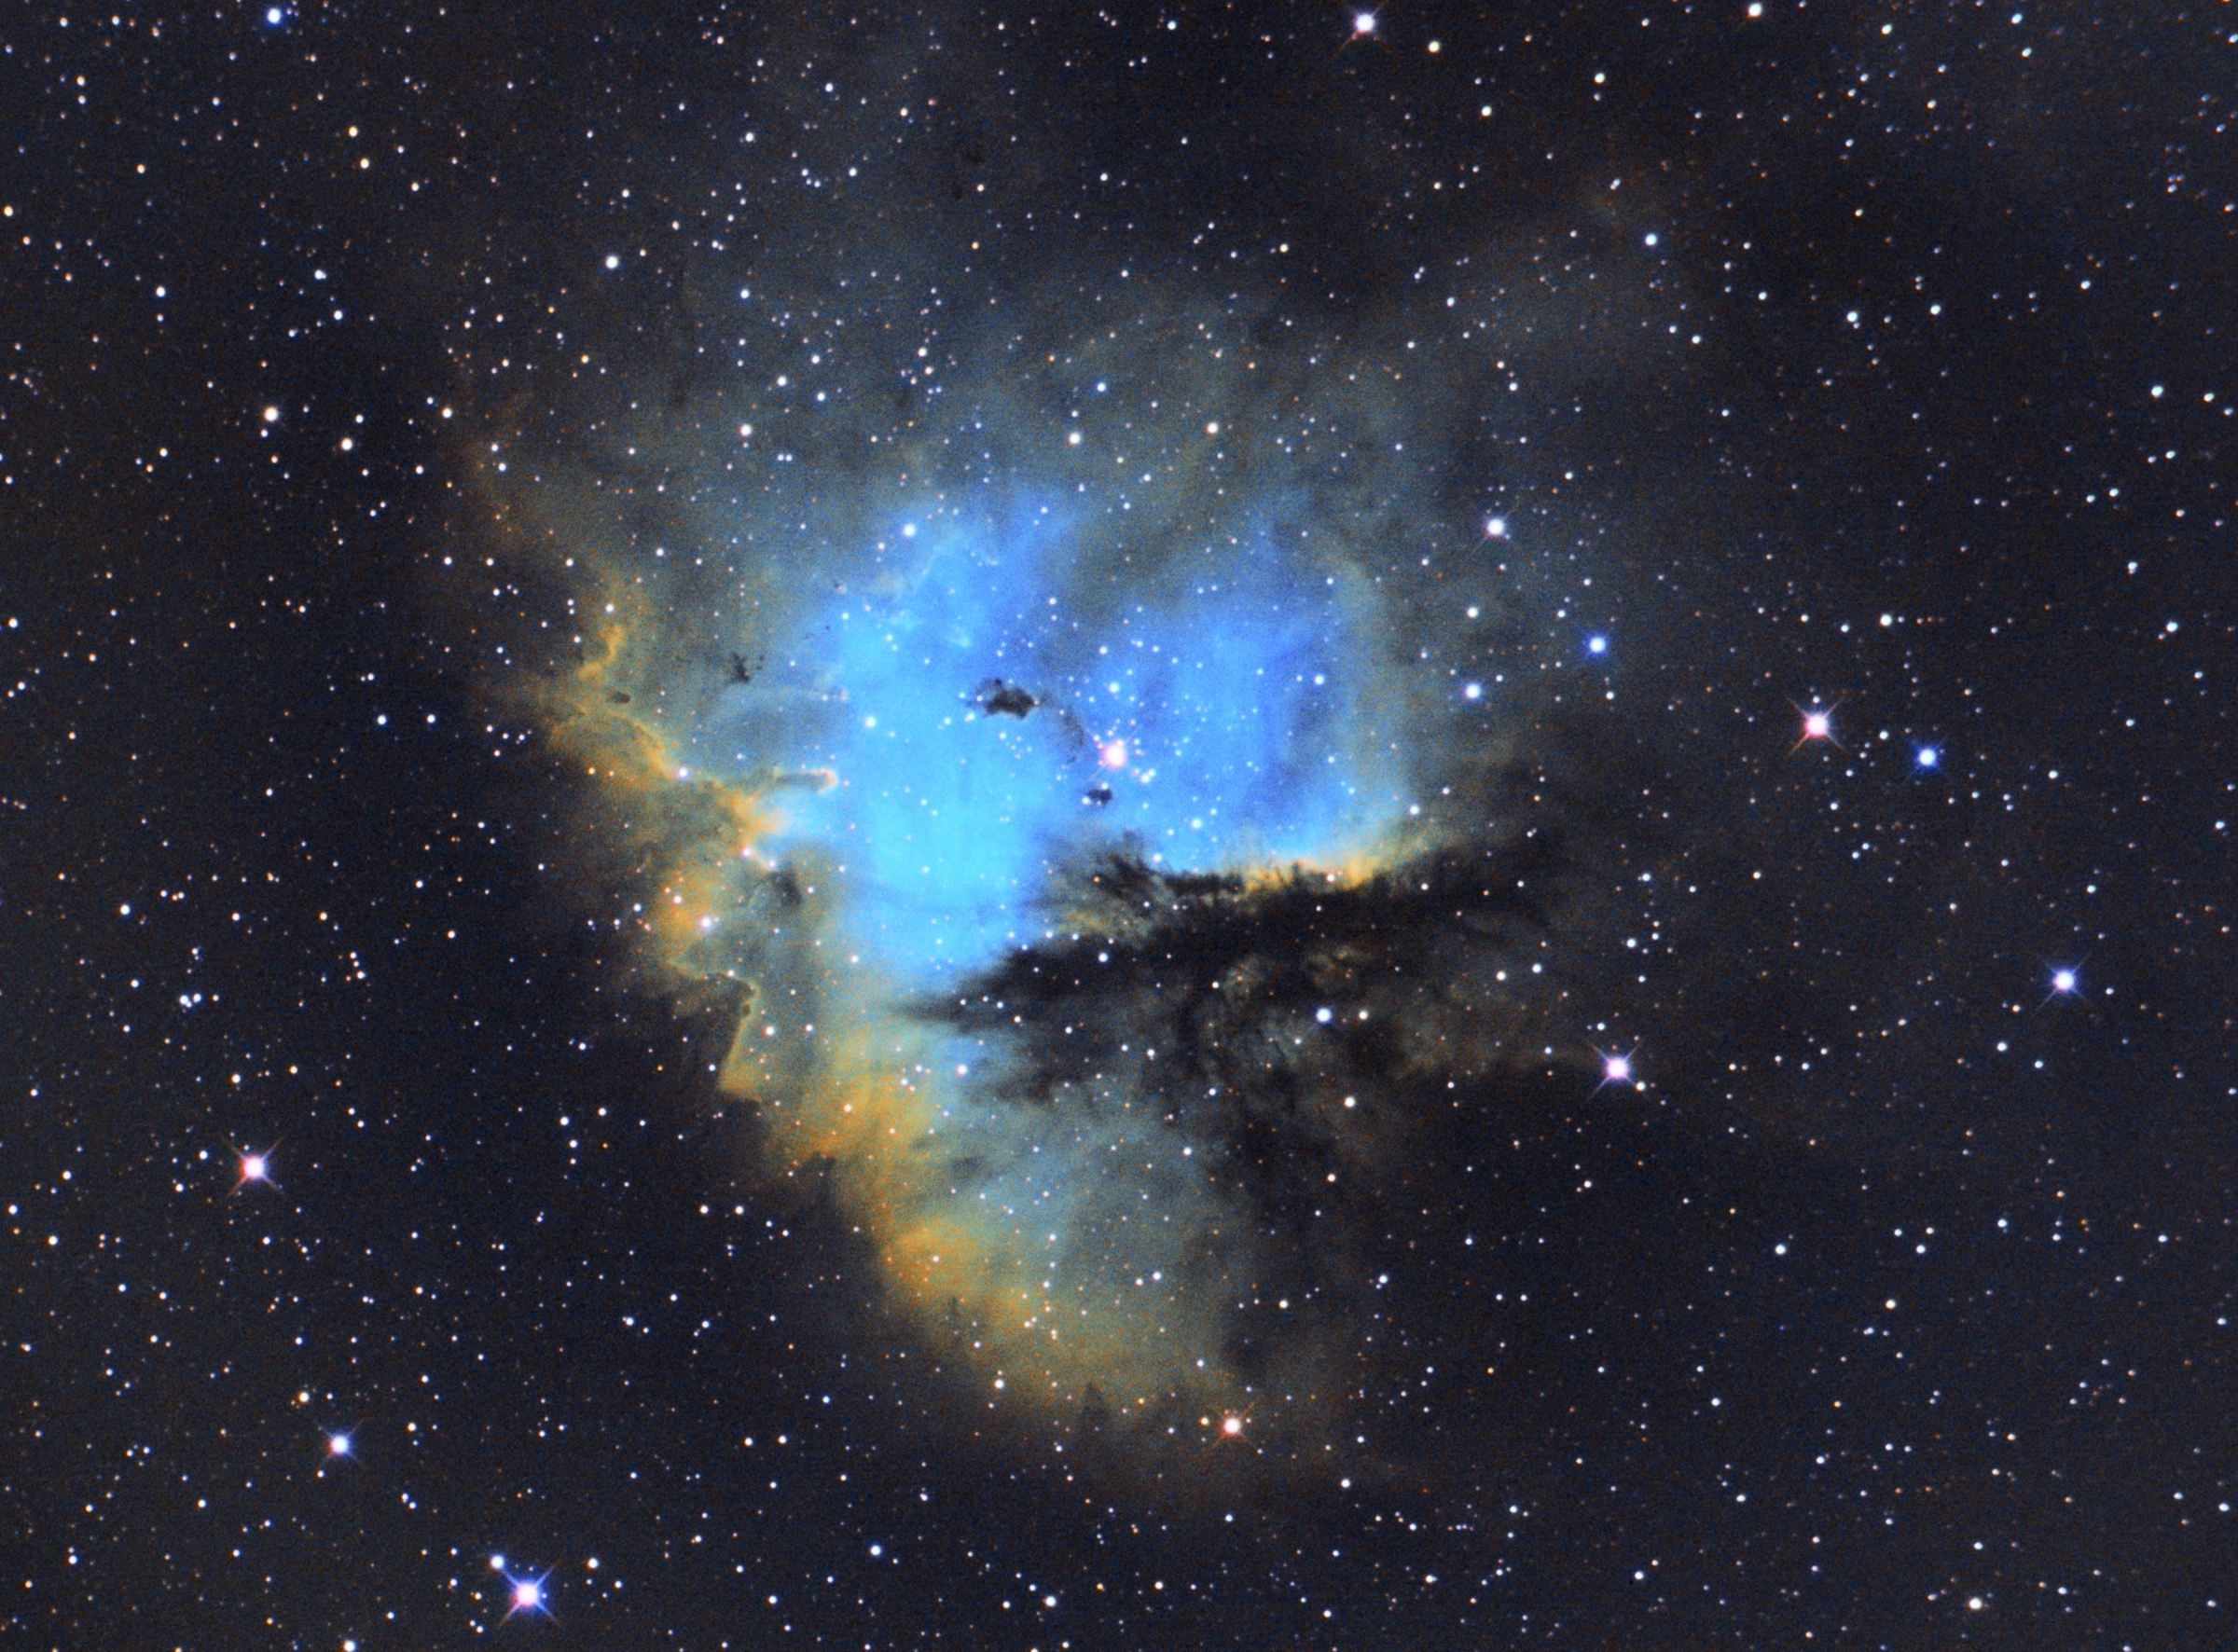 blue and yellow photo of the Pacman Nebula